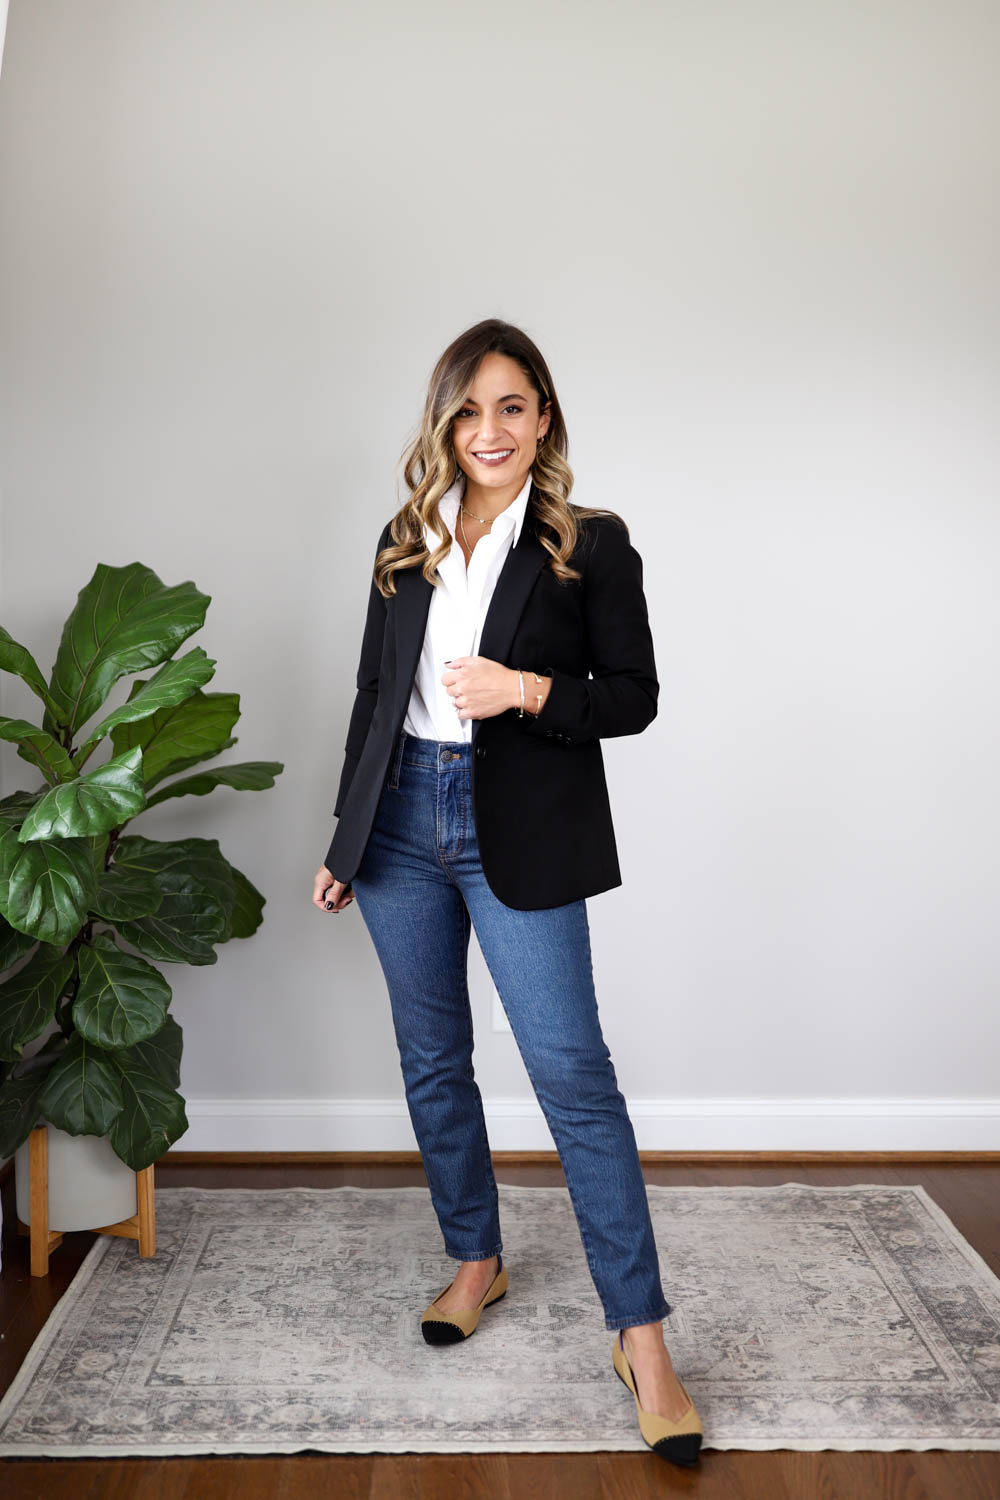 Best Business Casual Jeans Outfits for Women  Blazer with jeans, Blazer  outfits, Business casual jeans